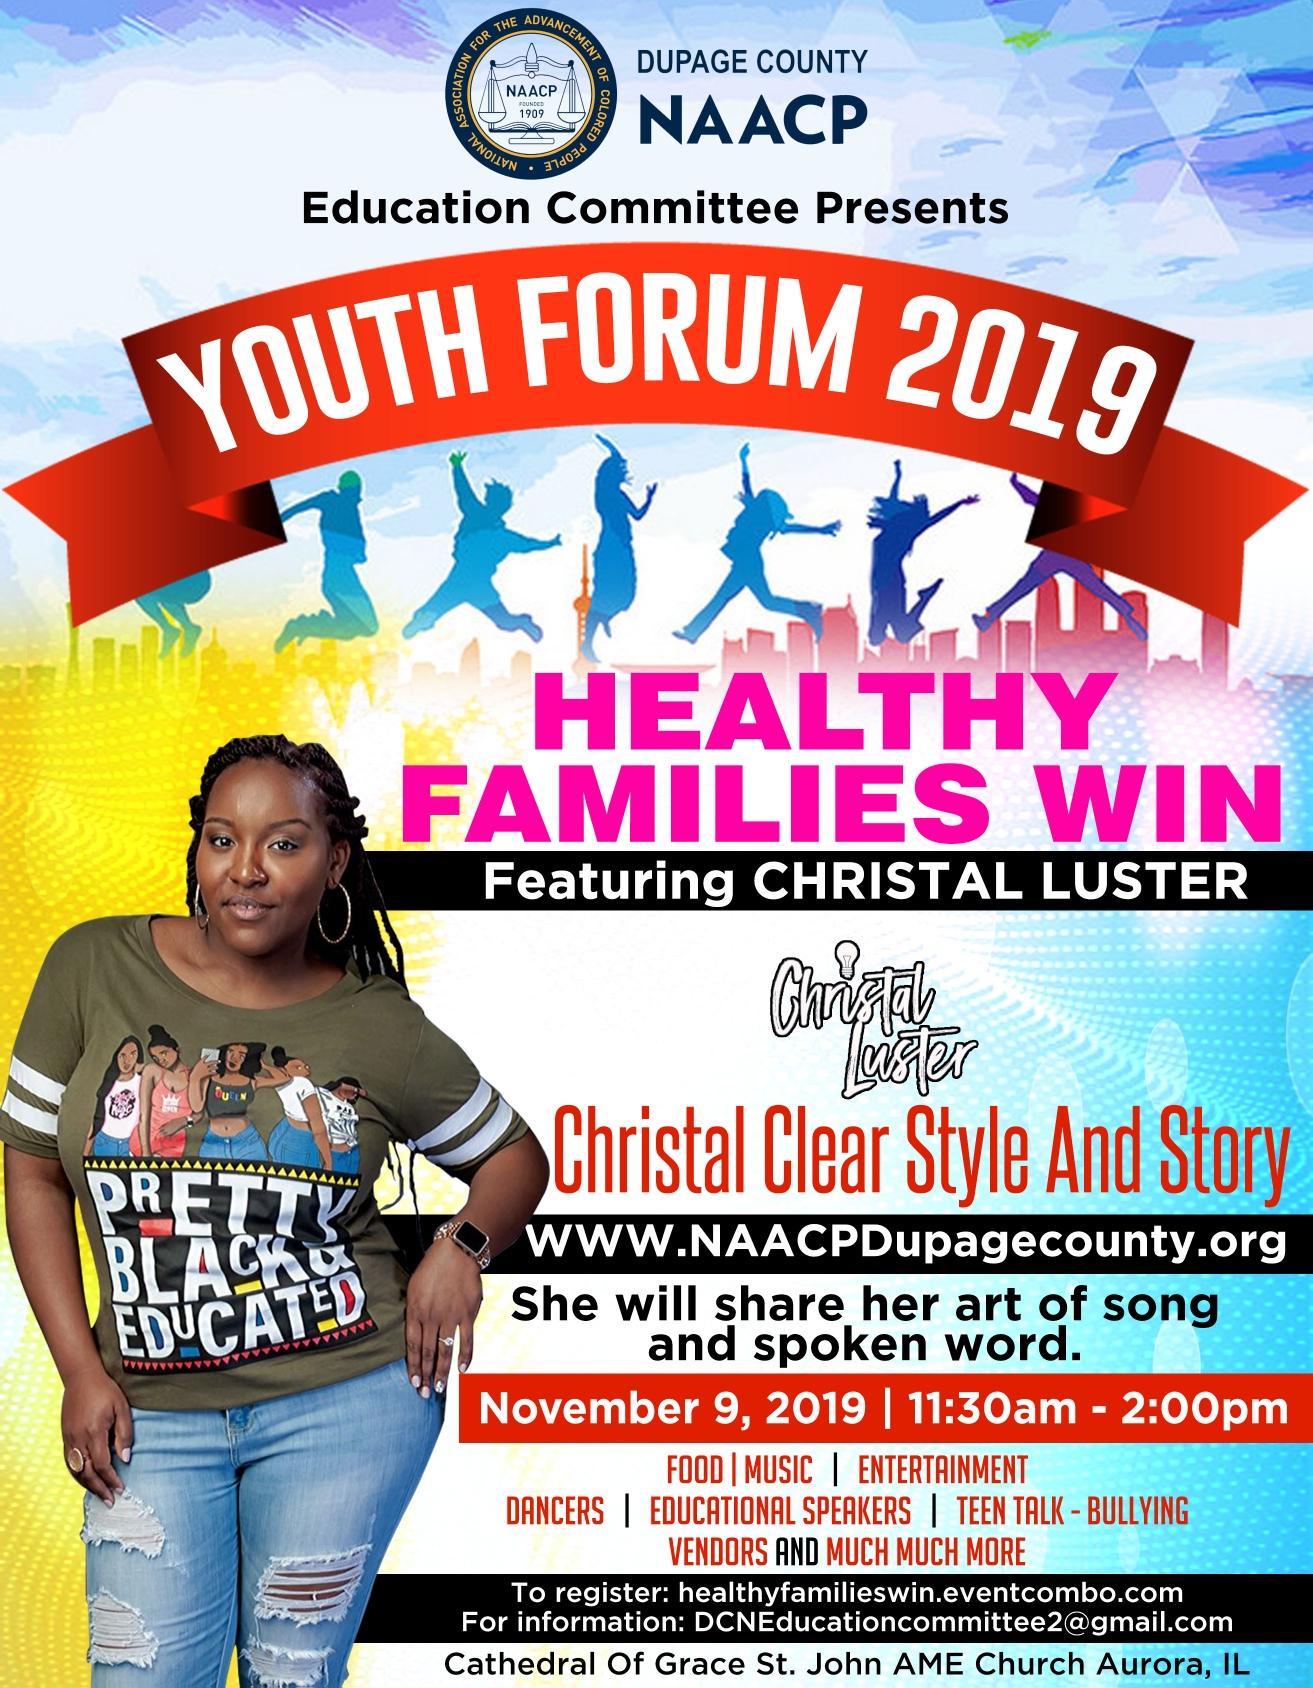 NAACP Youth Forum #5 "HEALTHY FAMILIES WIN"